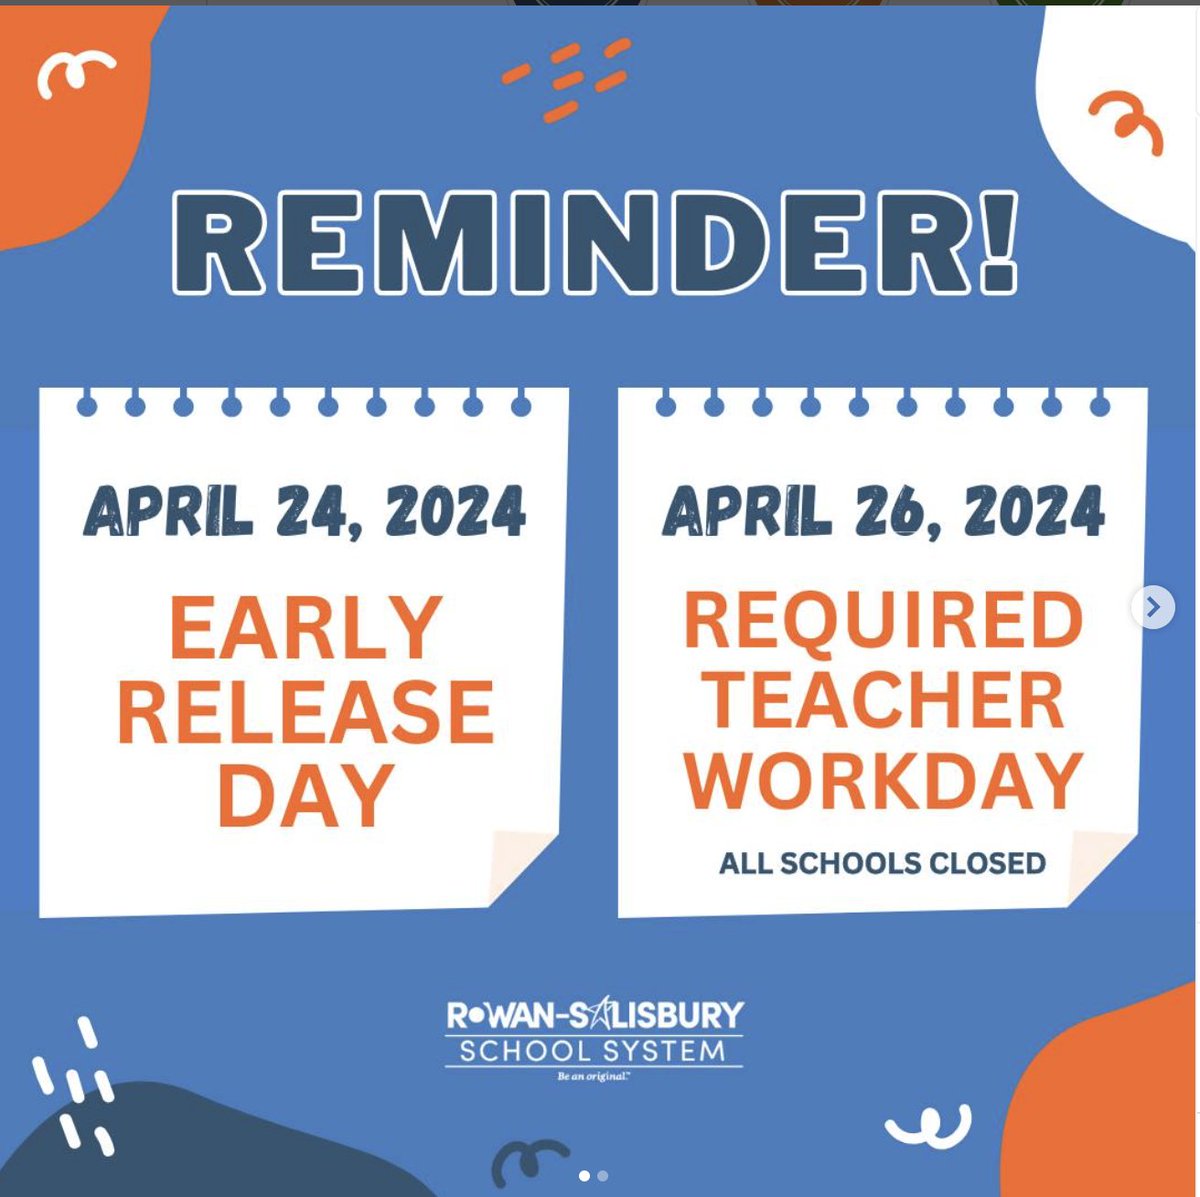 Tomorrow is an early release day!